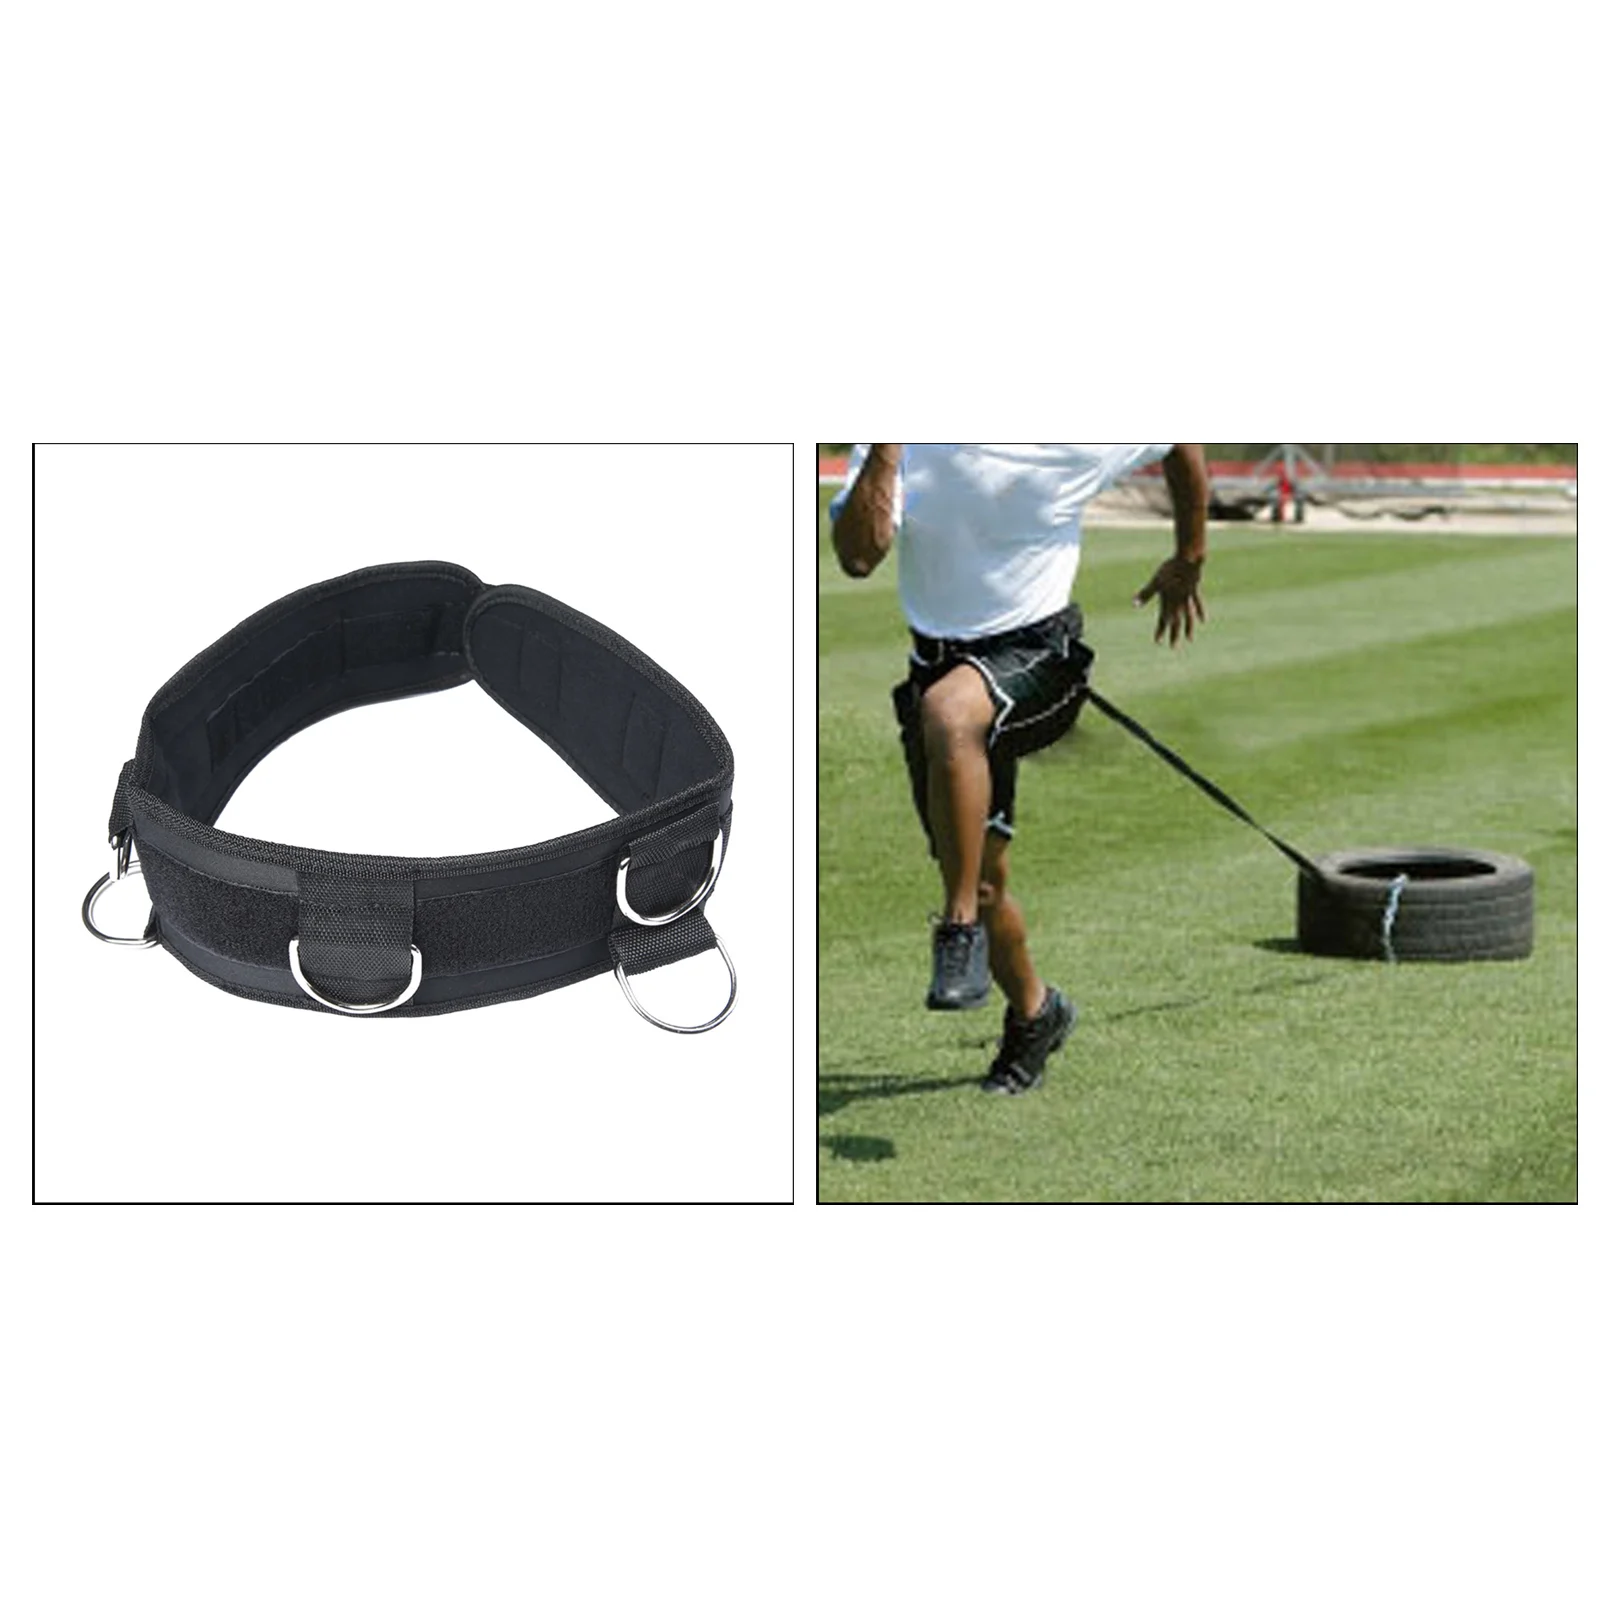 Bounce Trainer Belt Waist Strap Adjustable Sport Running Gym Resistance Band Speed Agility Resistance for Cable Machines